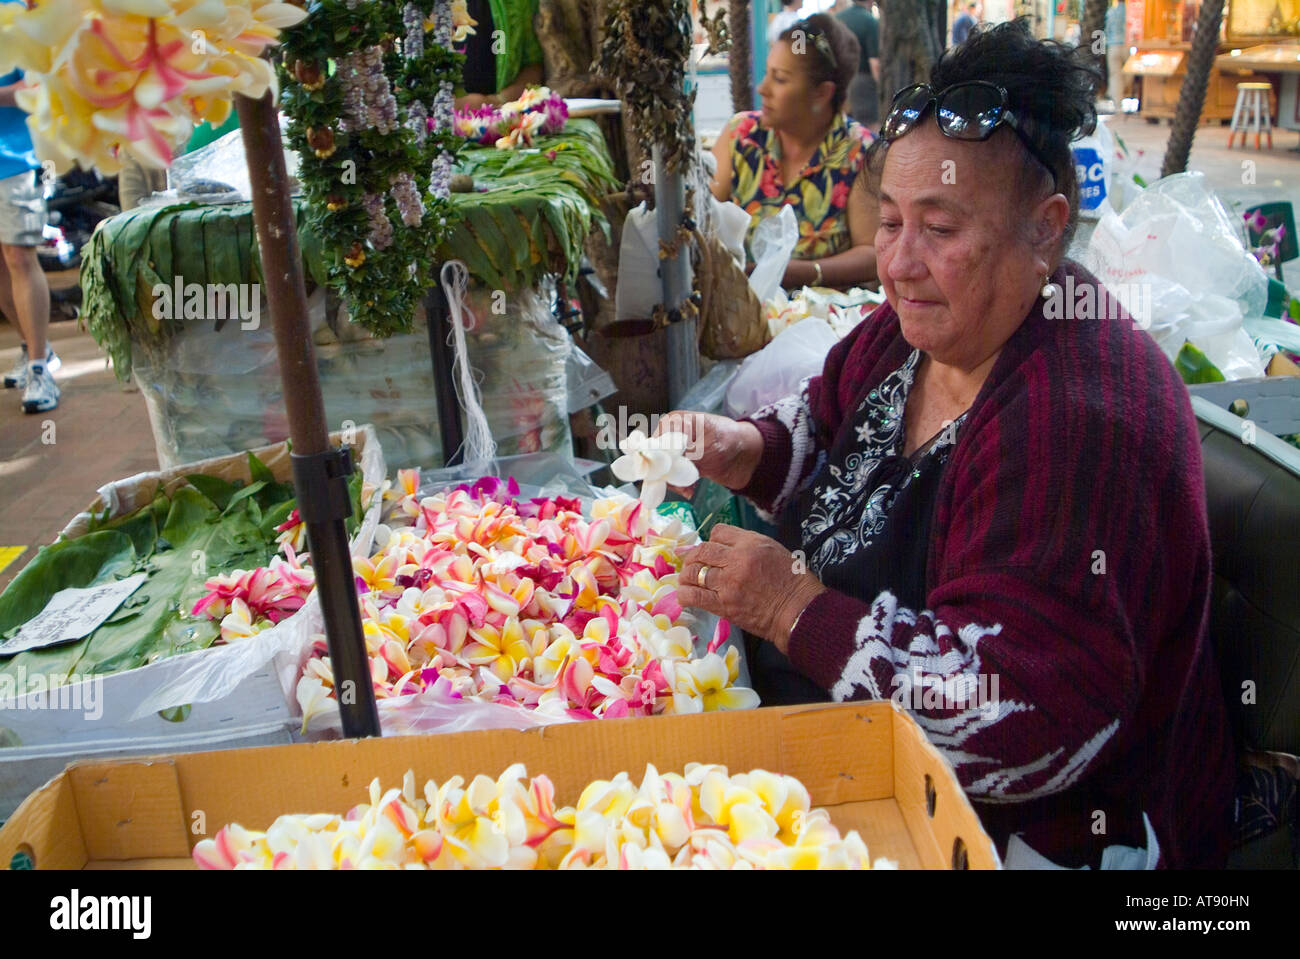 A leimaker at the International Market Place in Waikiki. Stock Photo